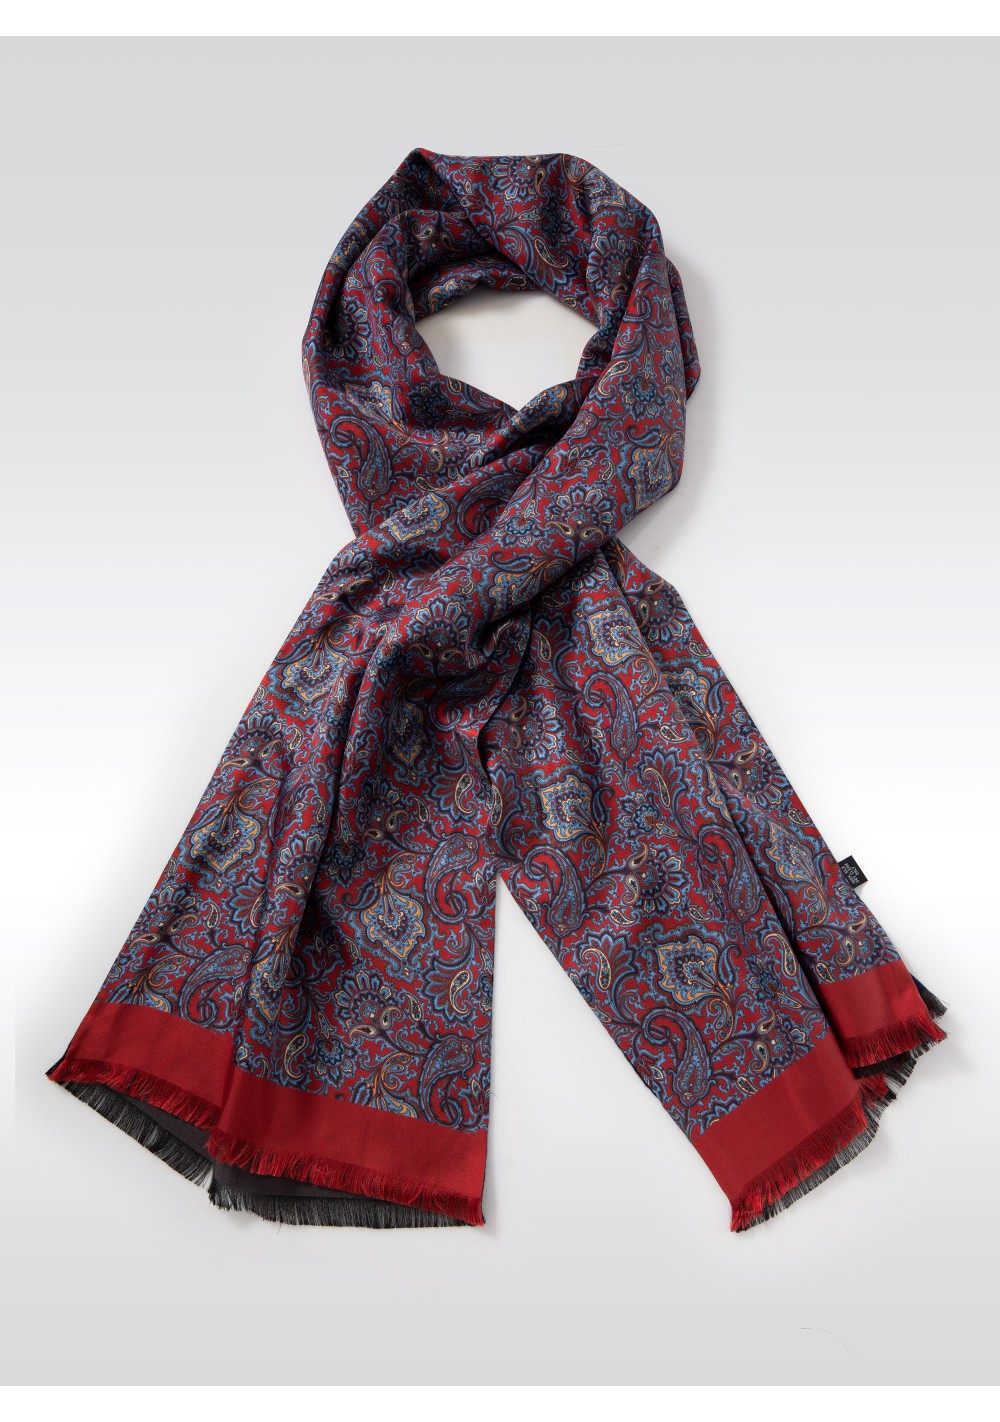 Italian Paisley Print Silk Scarf in Reds, Blues, and Gold